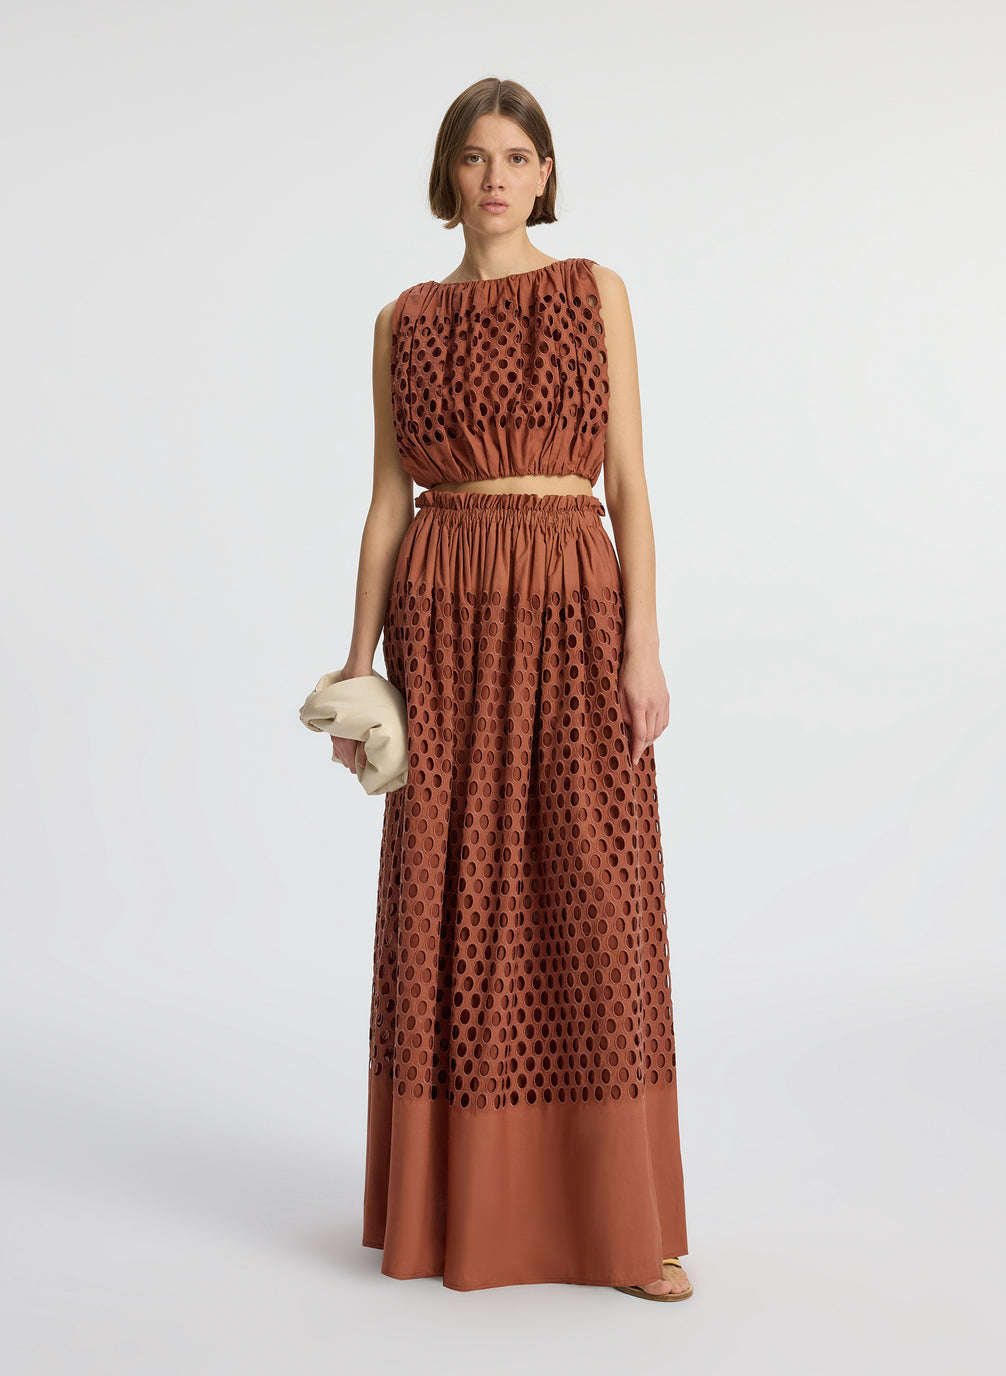 front view of woman wearing brown sleeveless top and matching maxi skirt